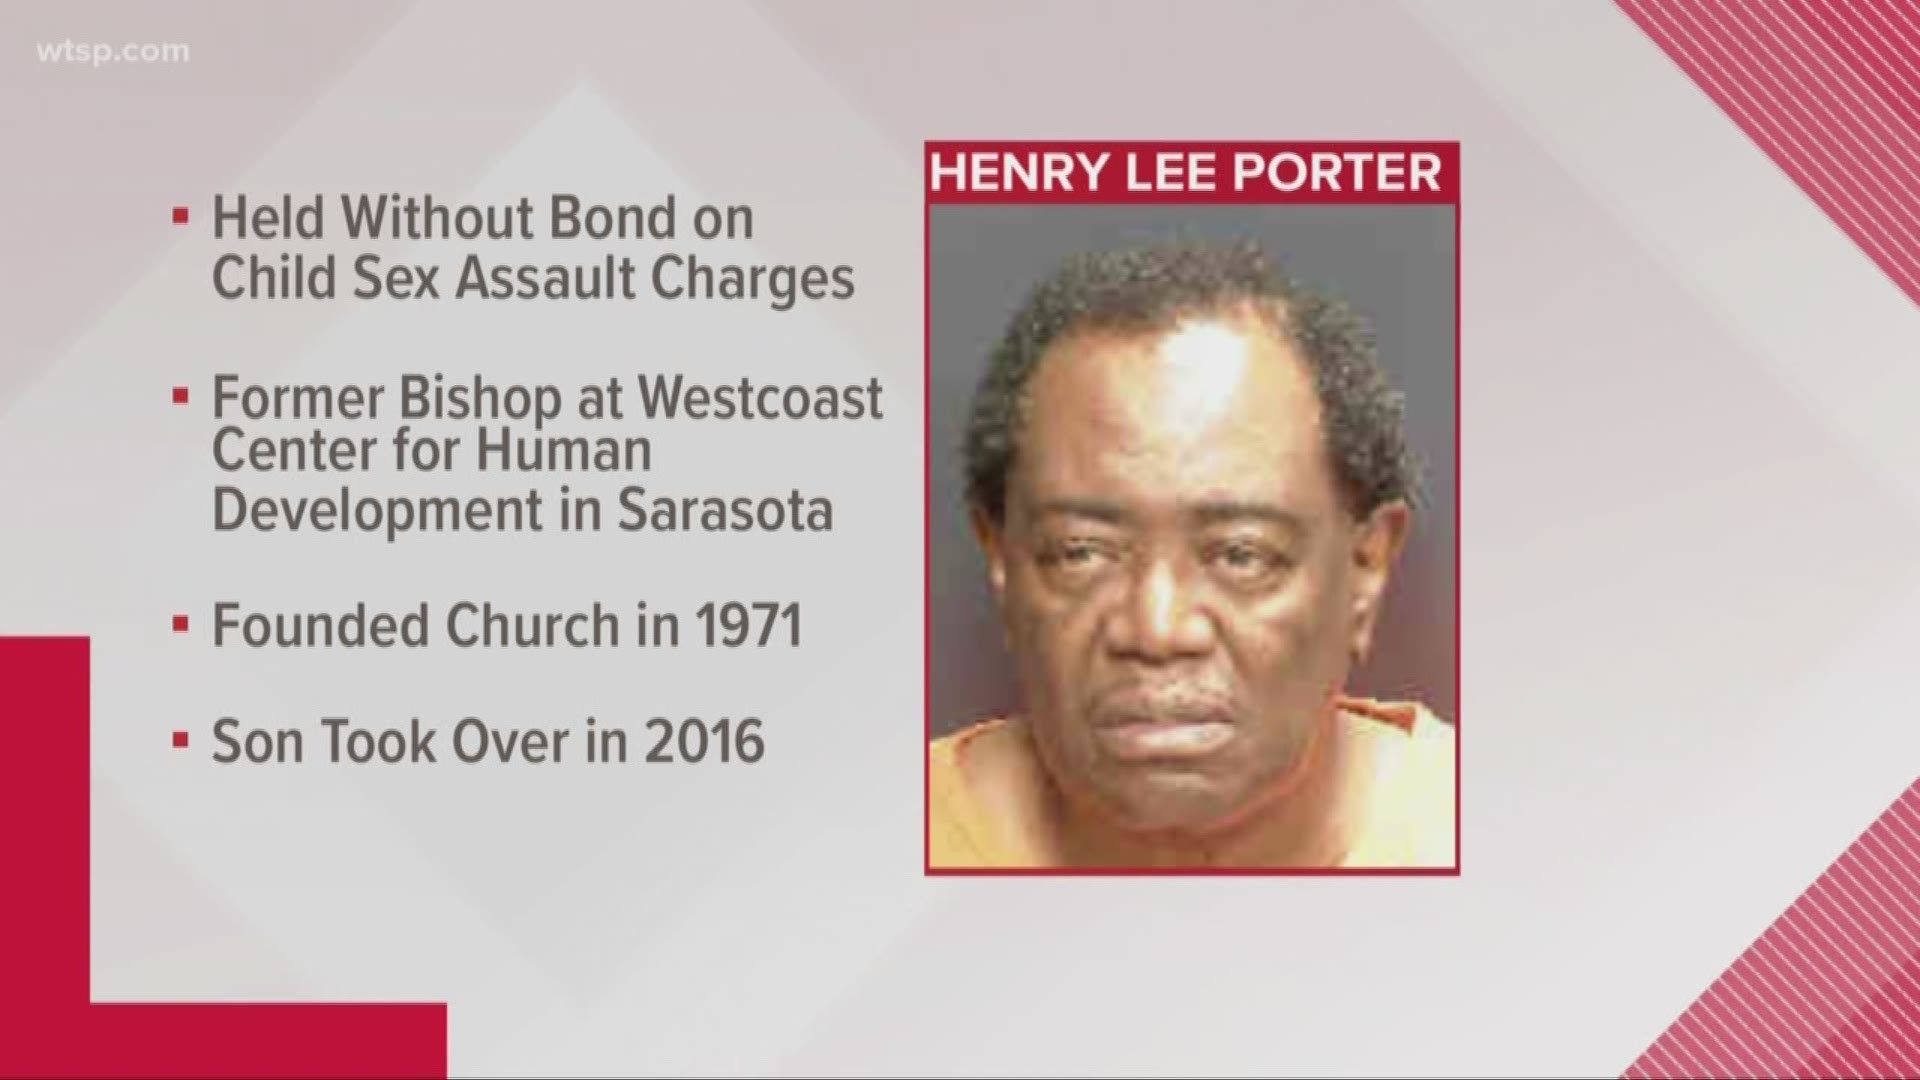 Henry Lee Porter was the founding bishop of Westcoast Center for Human Development in Sarasota.